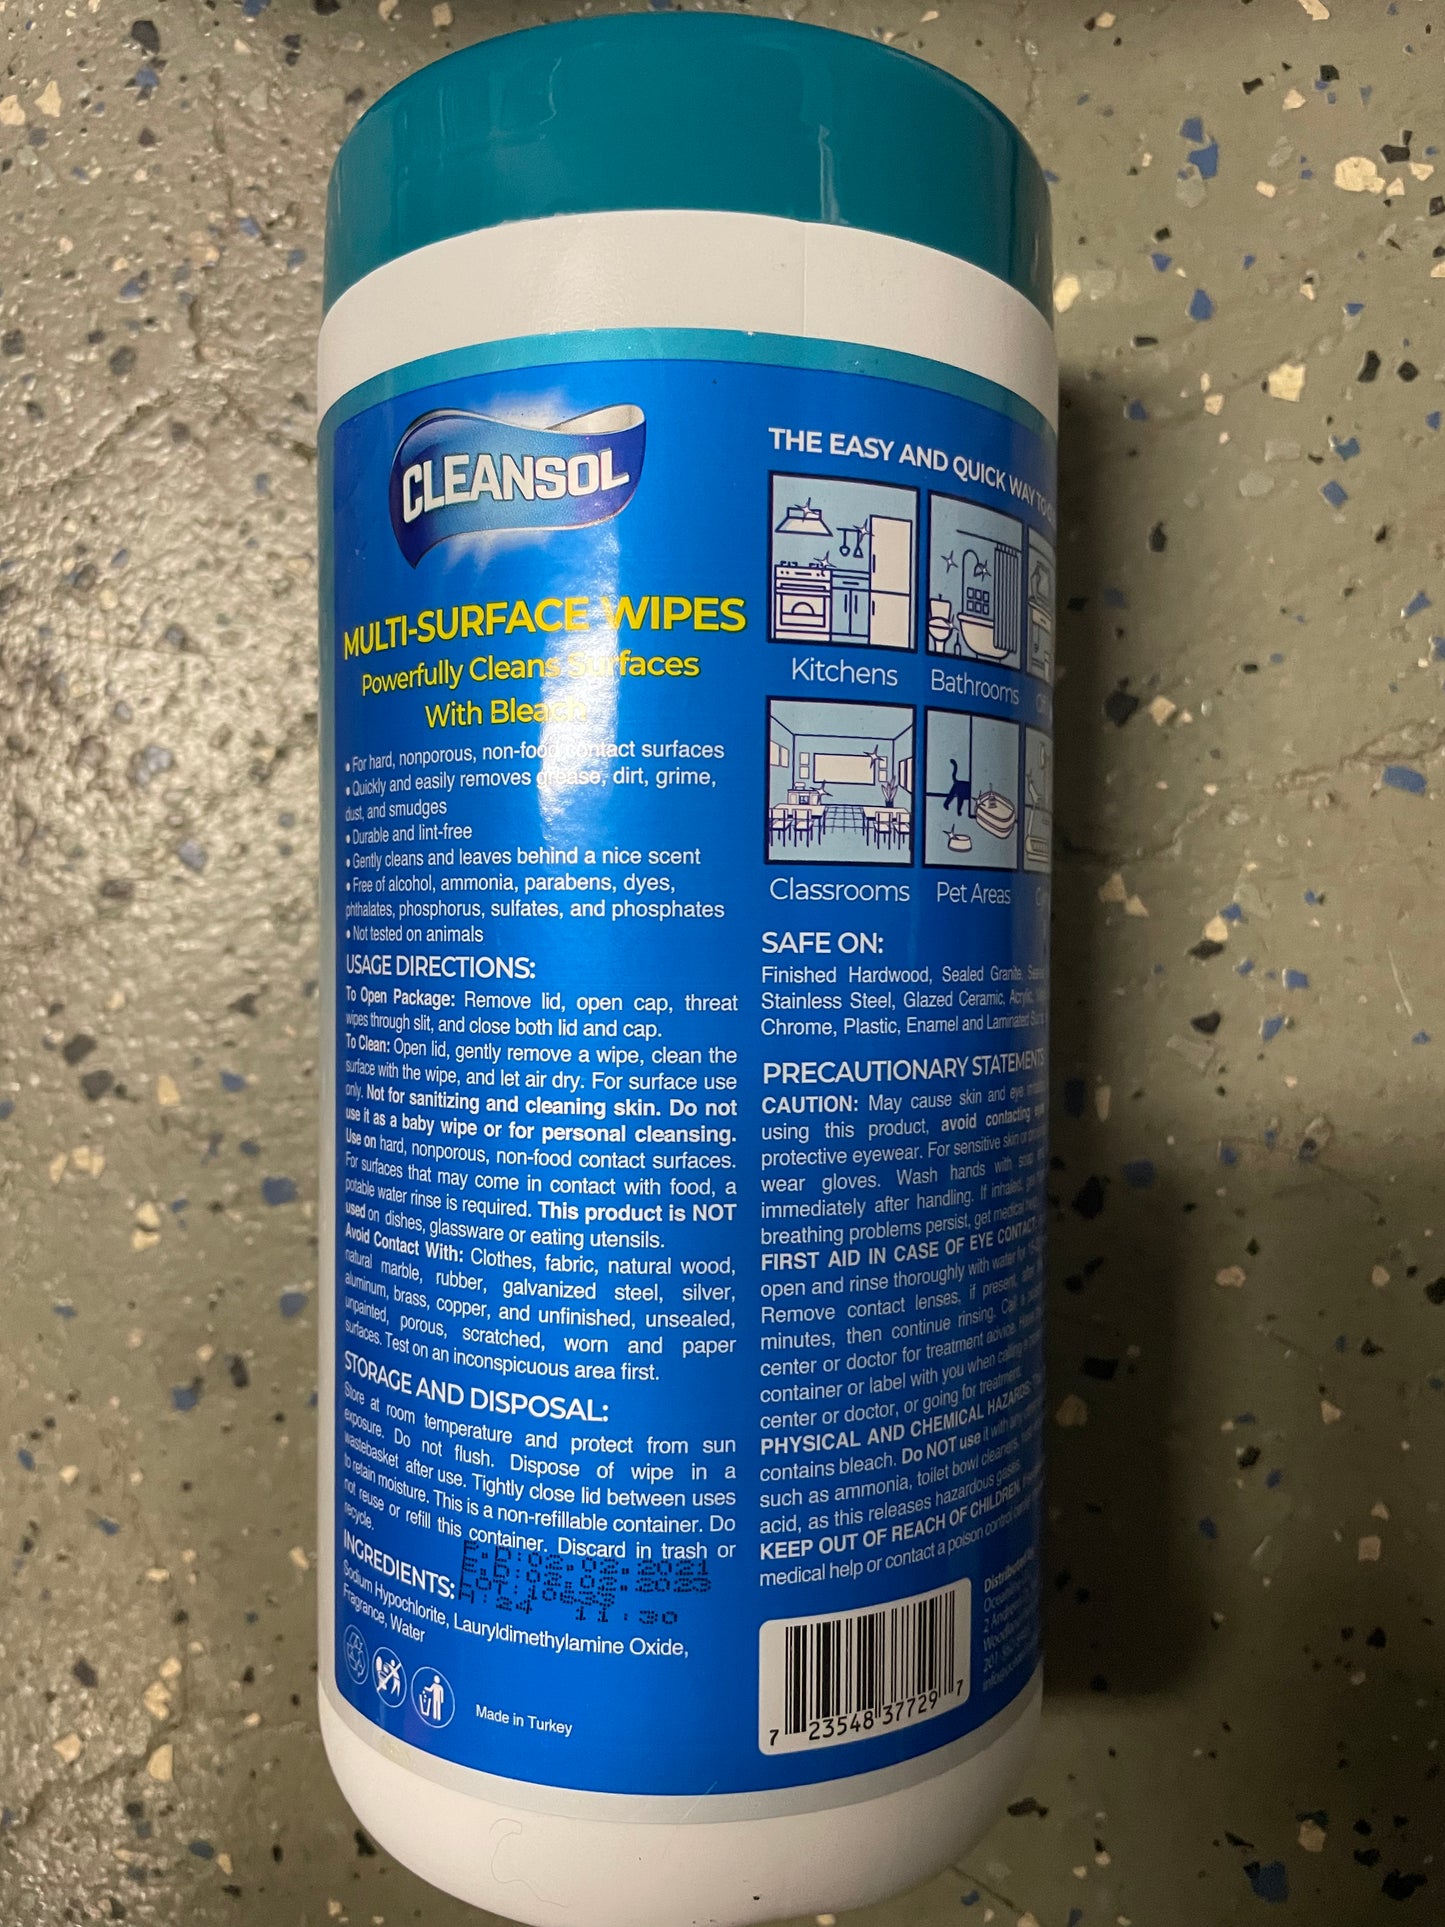 Cleansol Multi Surface Wipes